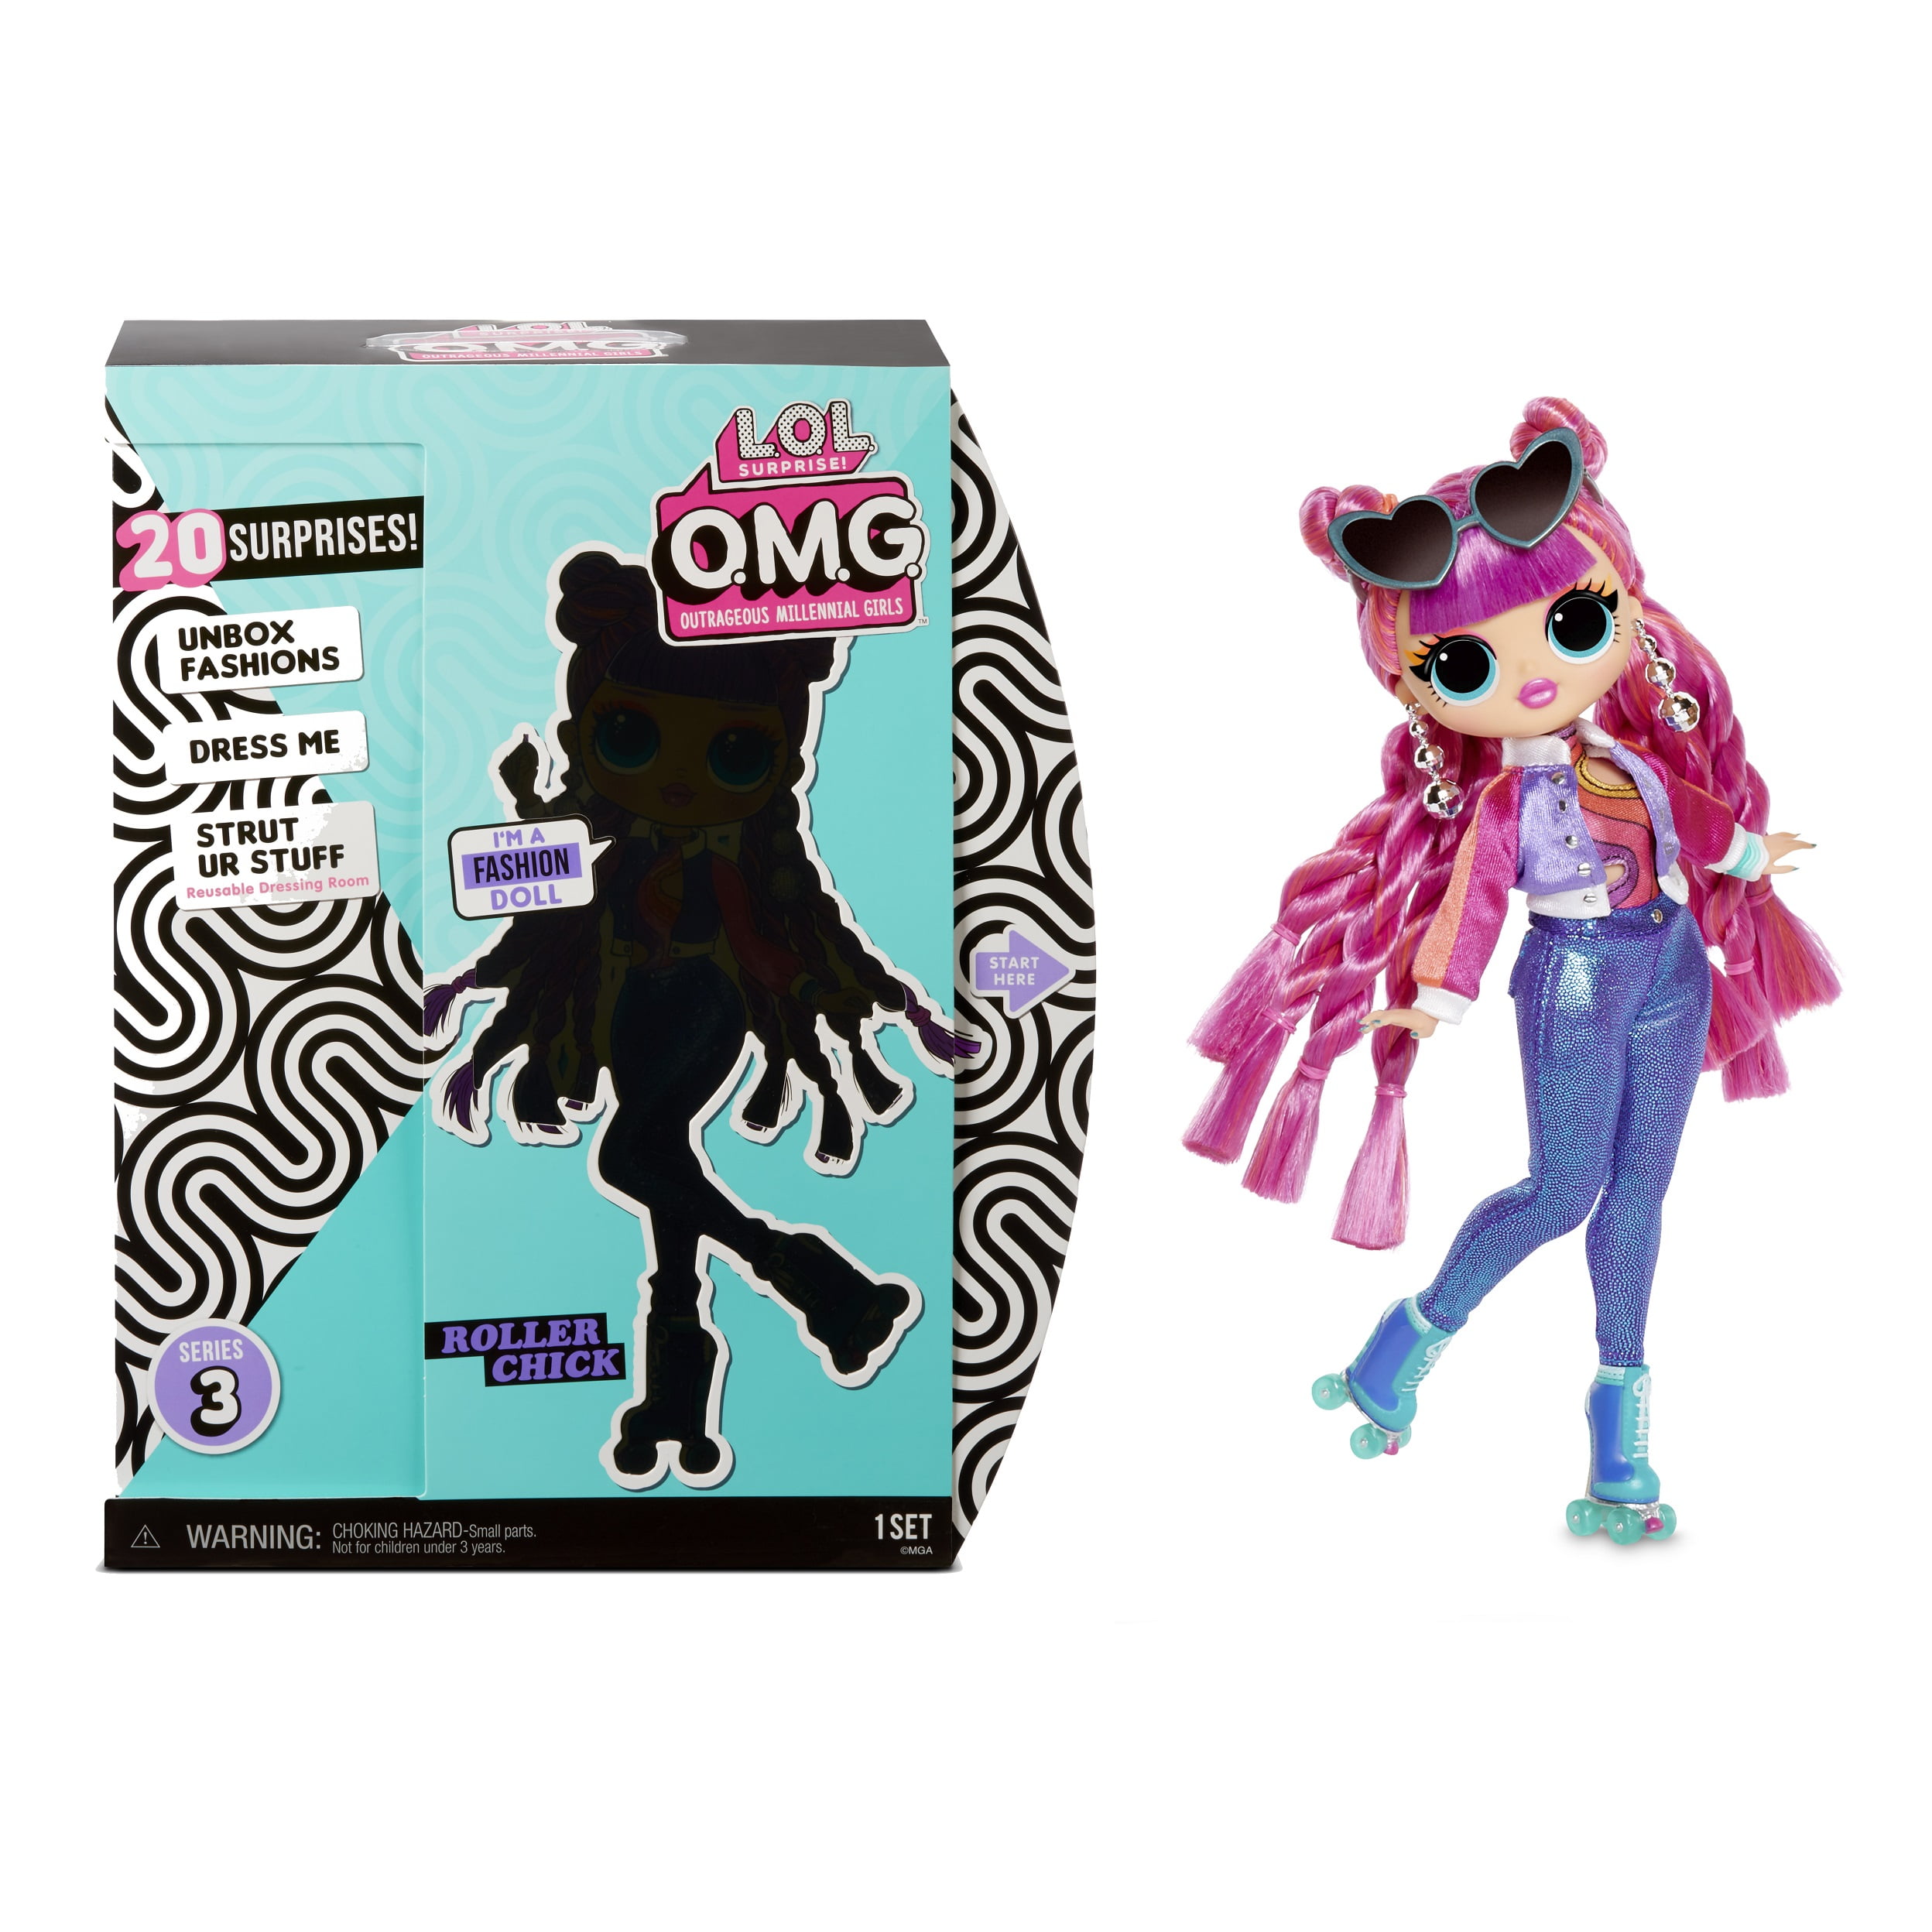 LOL Surprise OMG Uptown Girl Fashion Doll with 20 Surprises 